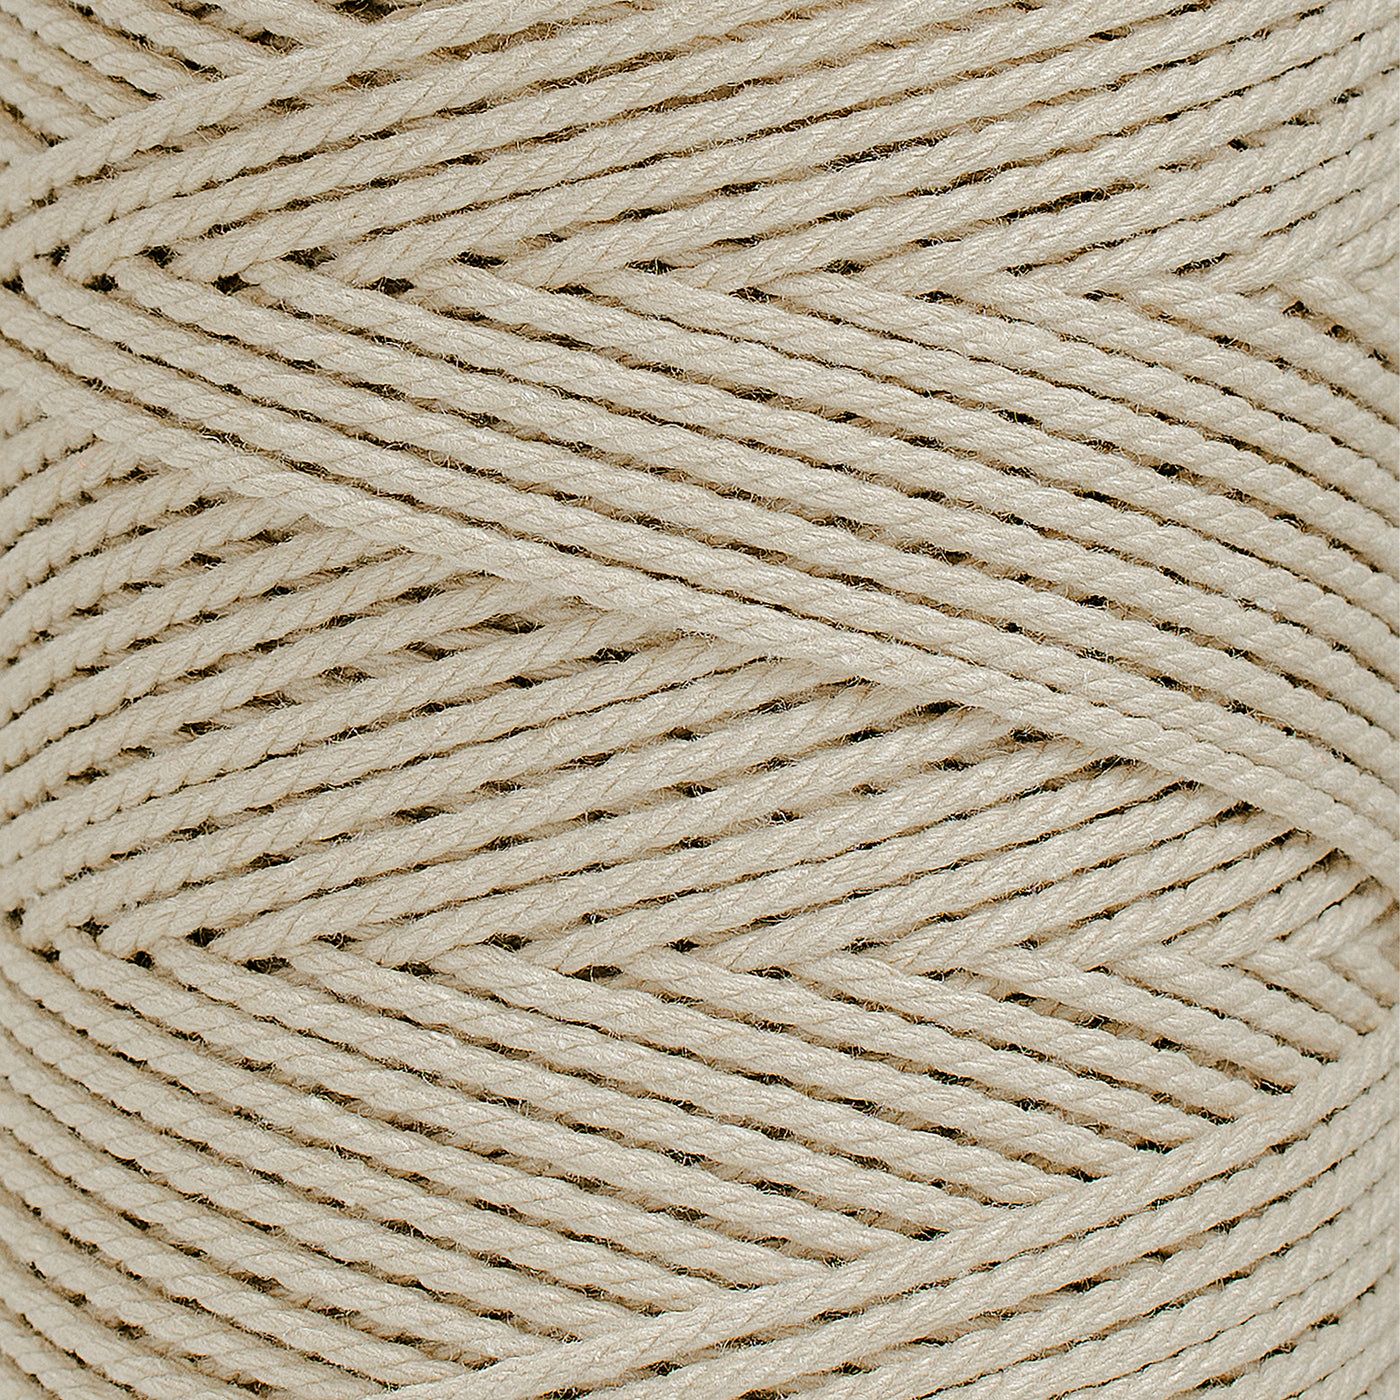 COTTON ROPE ZERO WASTE 2 MM - 3 PLY - OAT COLOR